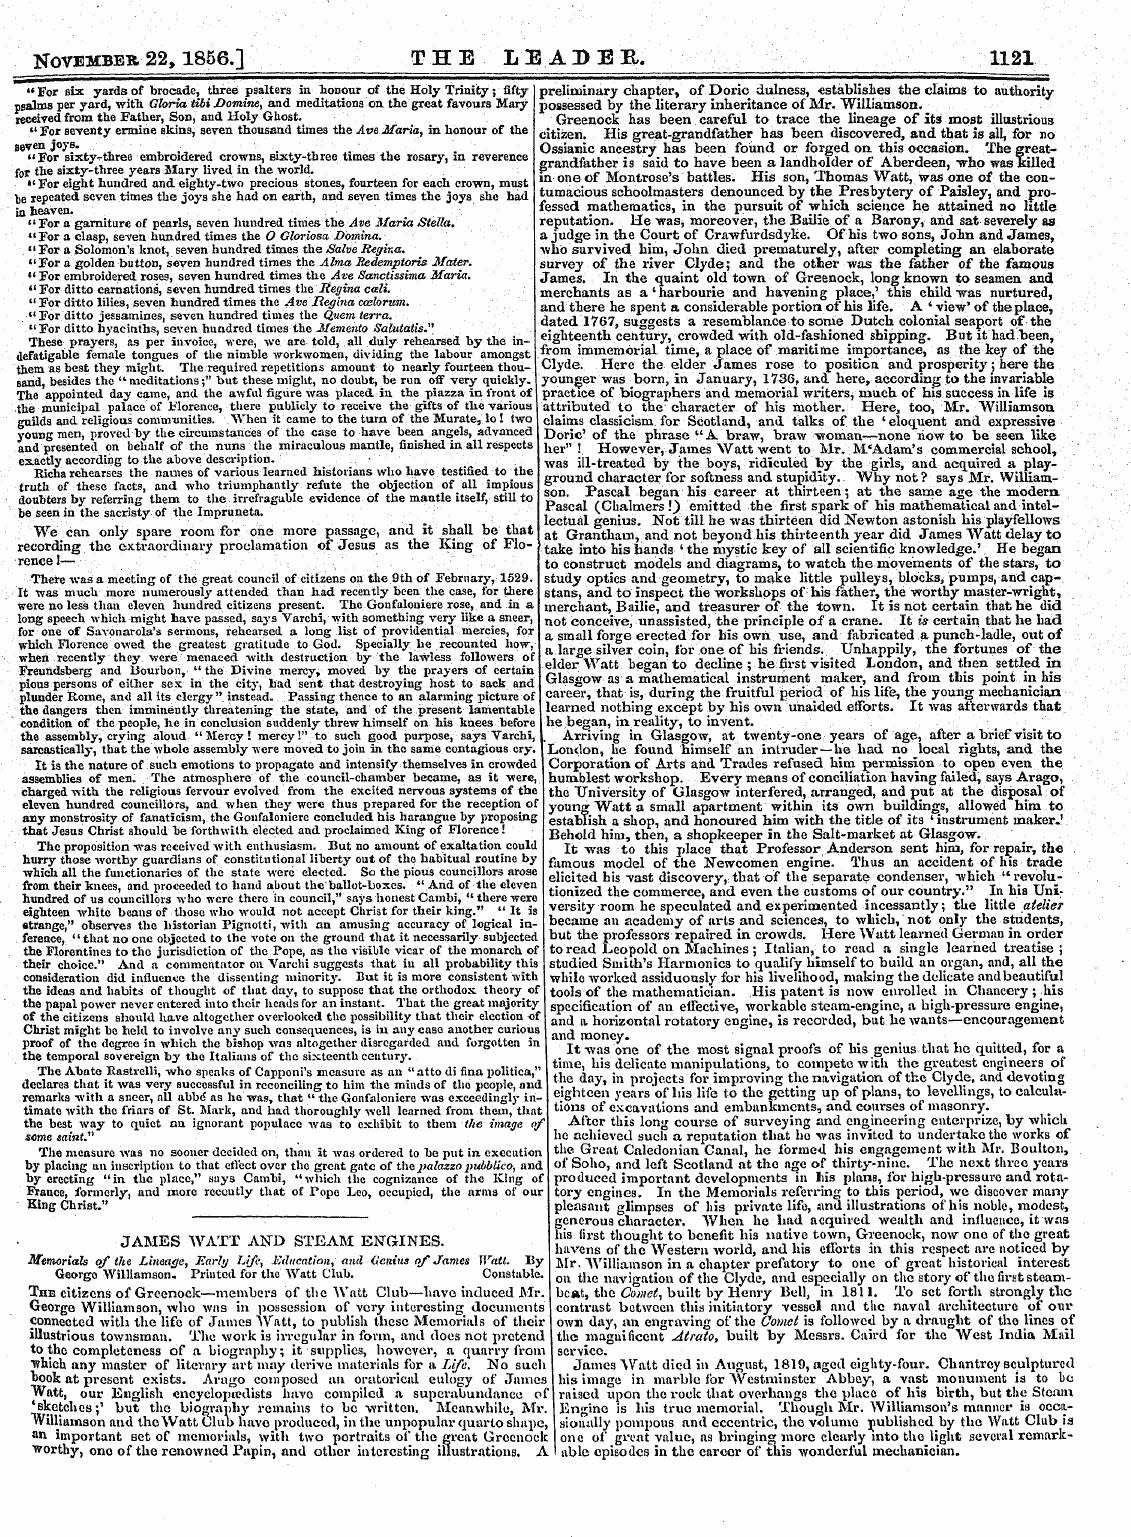 Leader (1850-1860): jS F Y, 2nd edition - November 22,1856.] The Leadee, _ 1121